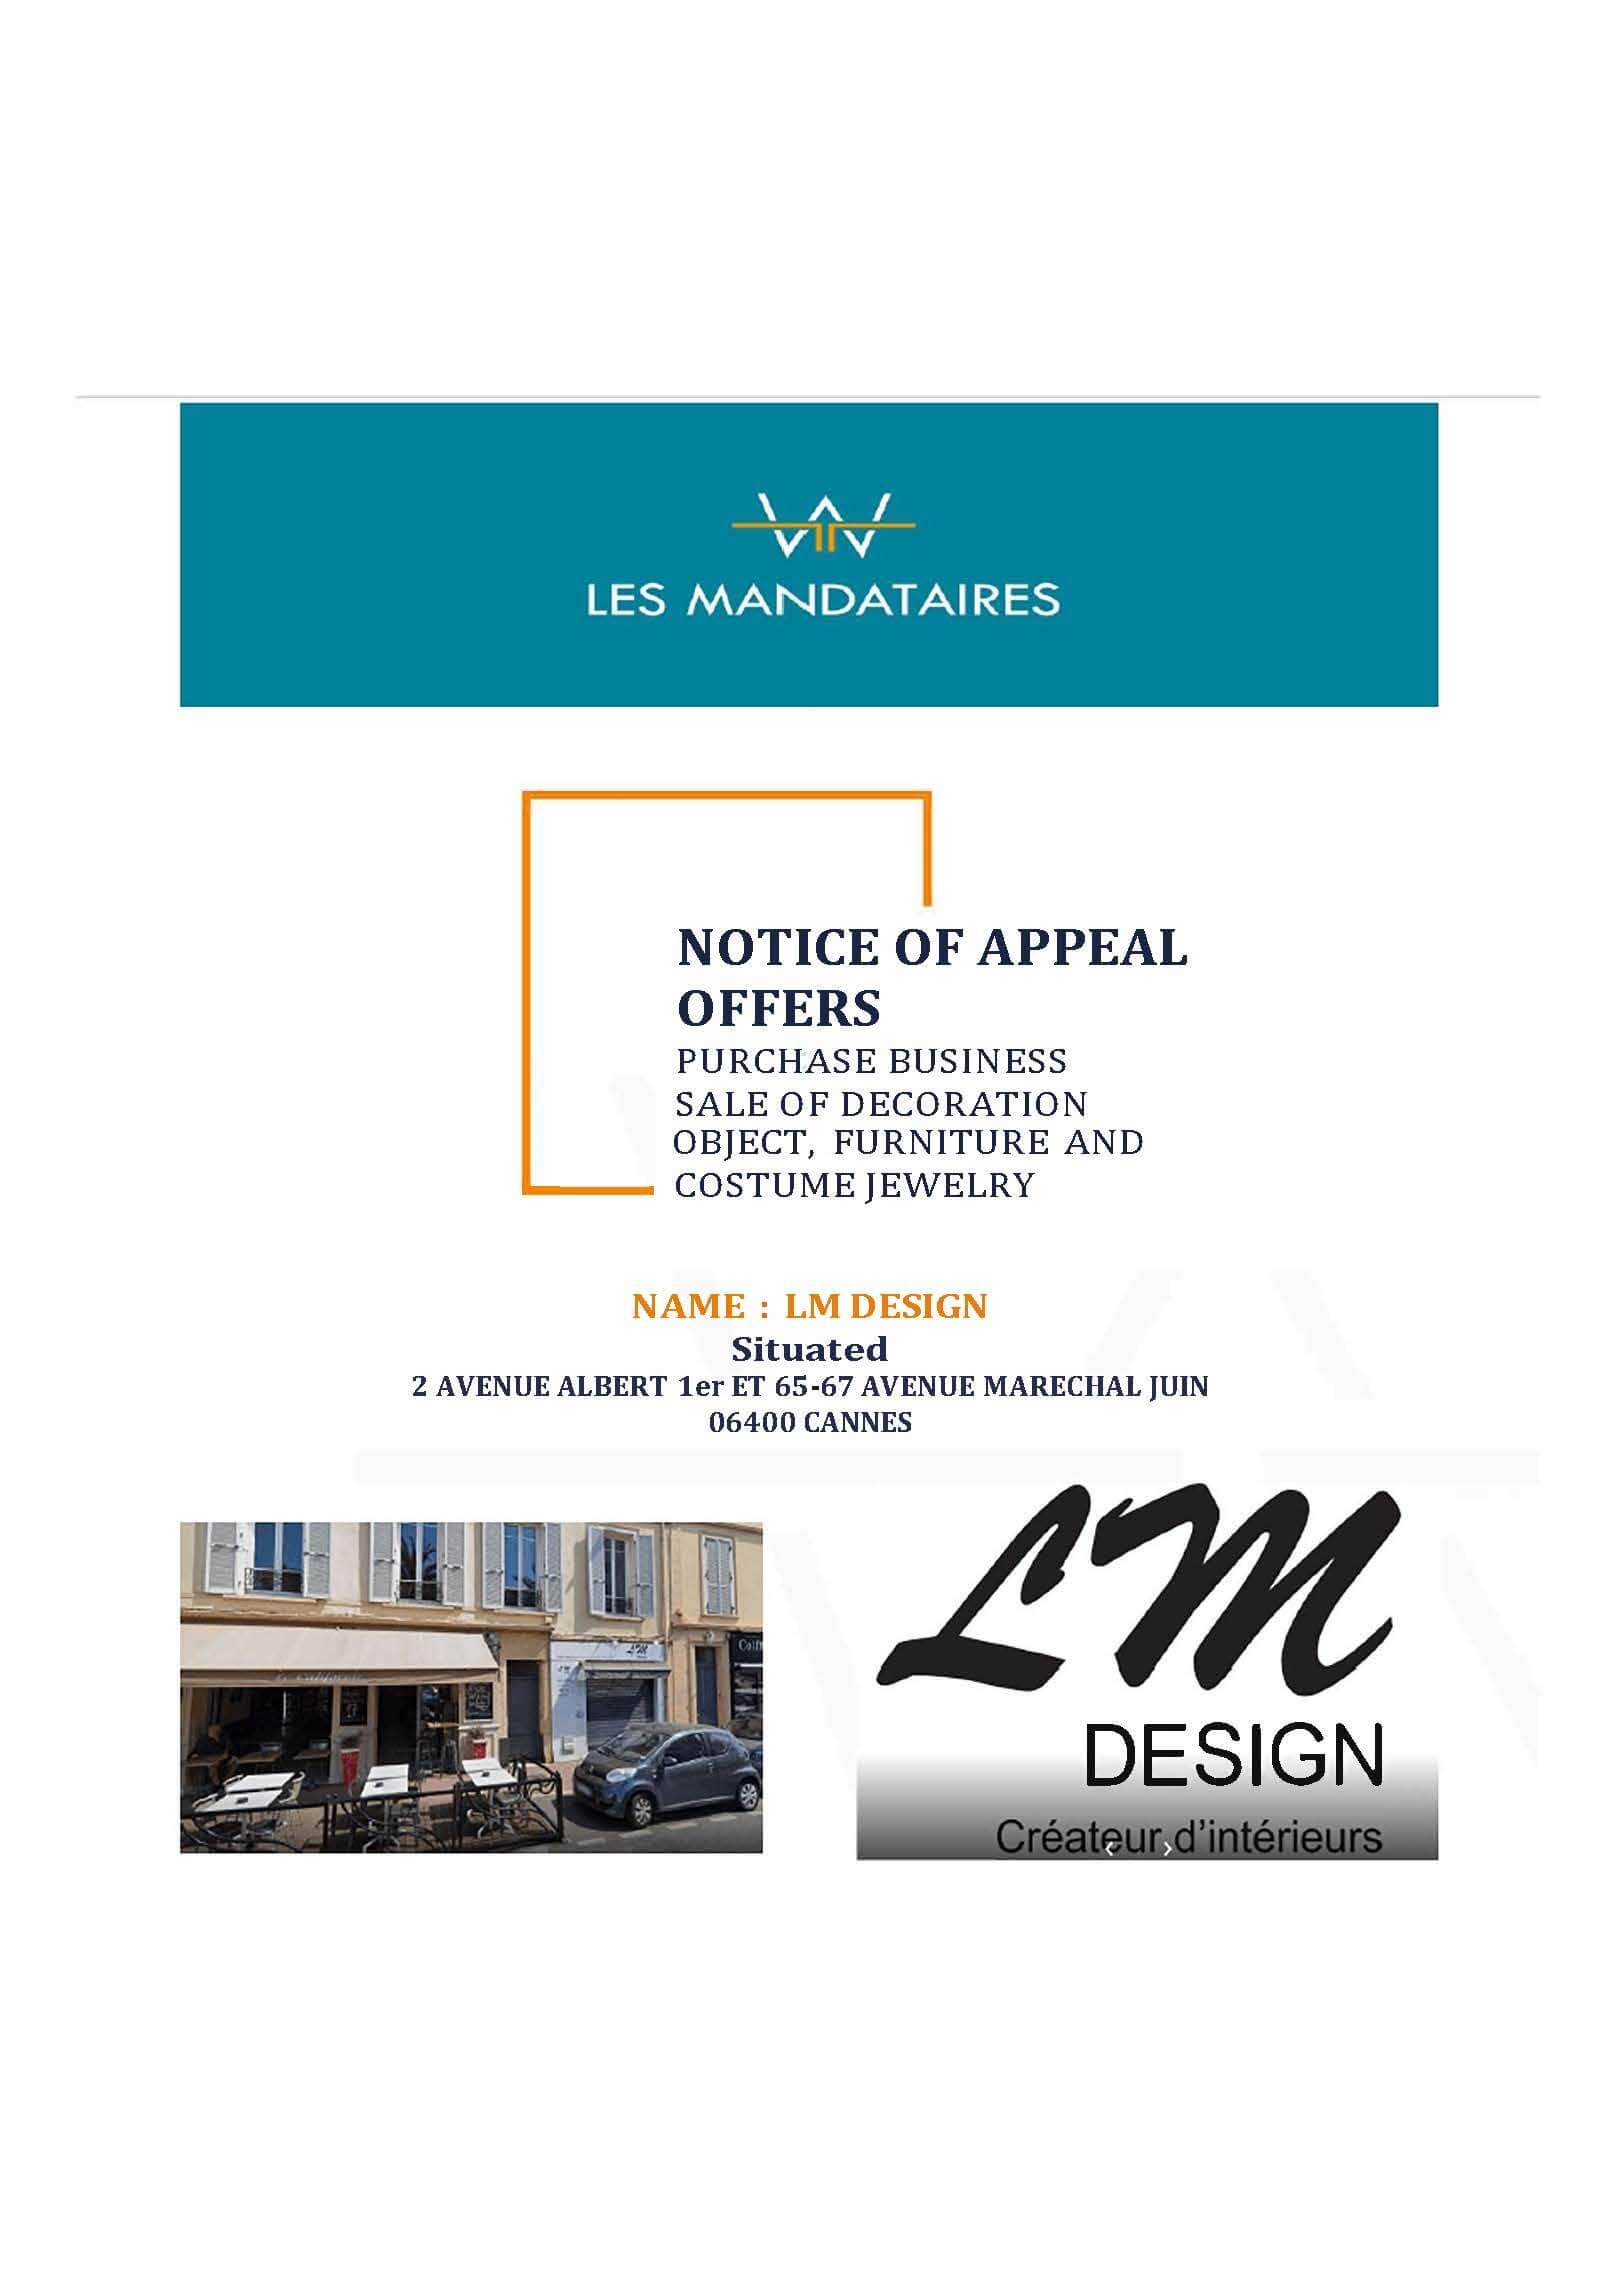 CALL FOR TENDERS: L.M DESIGN BRAND